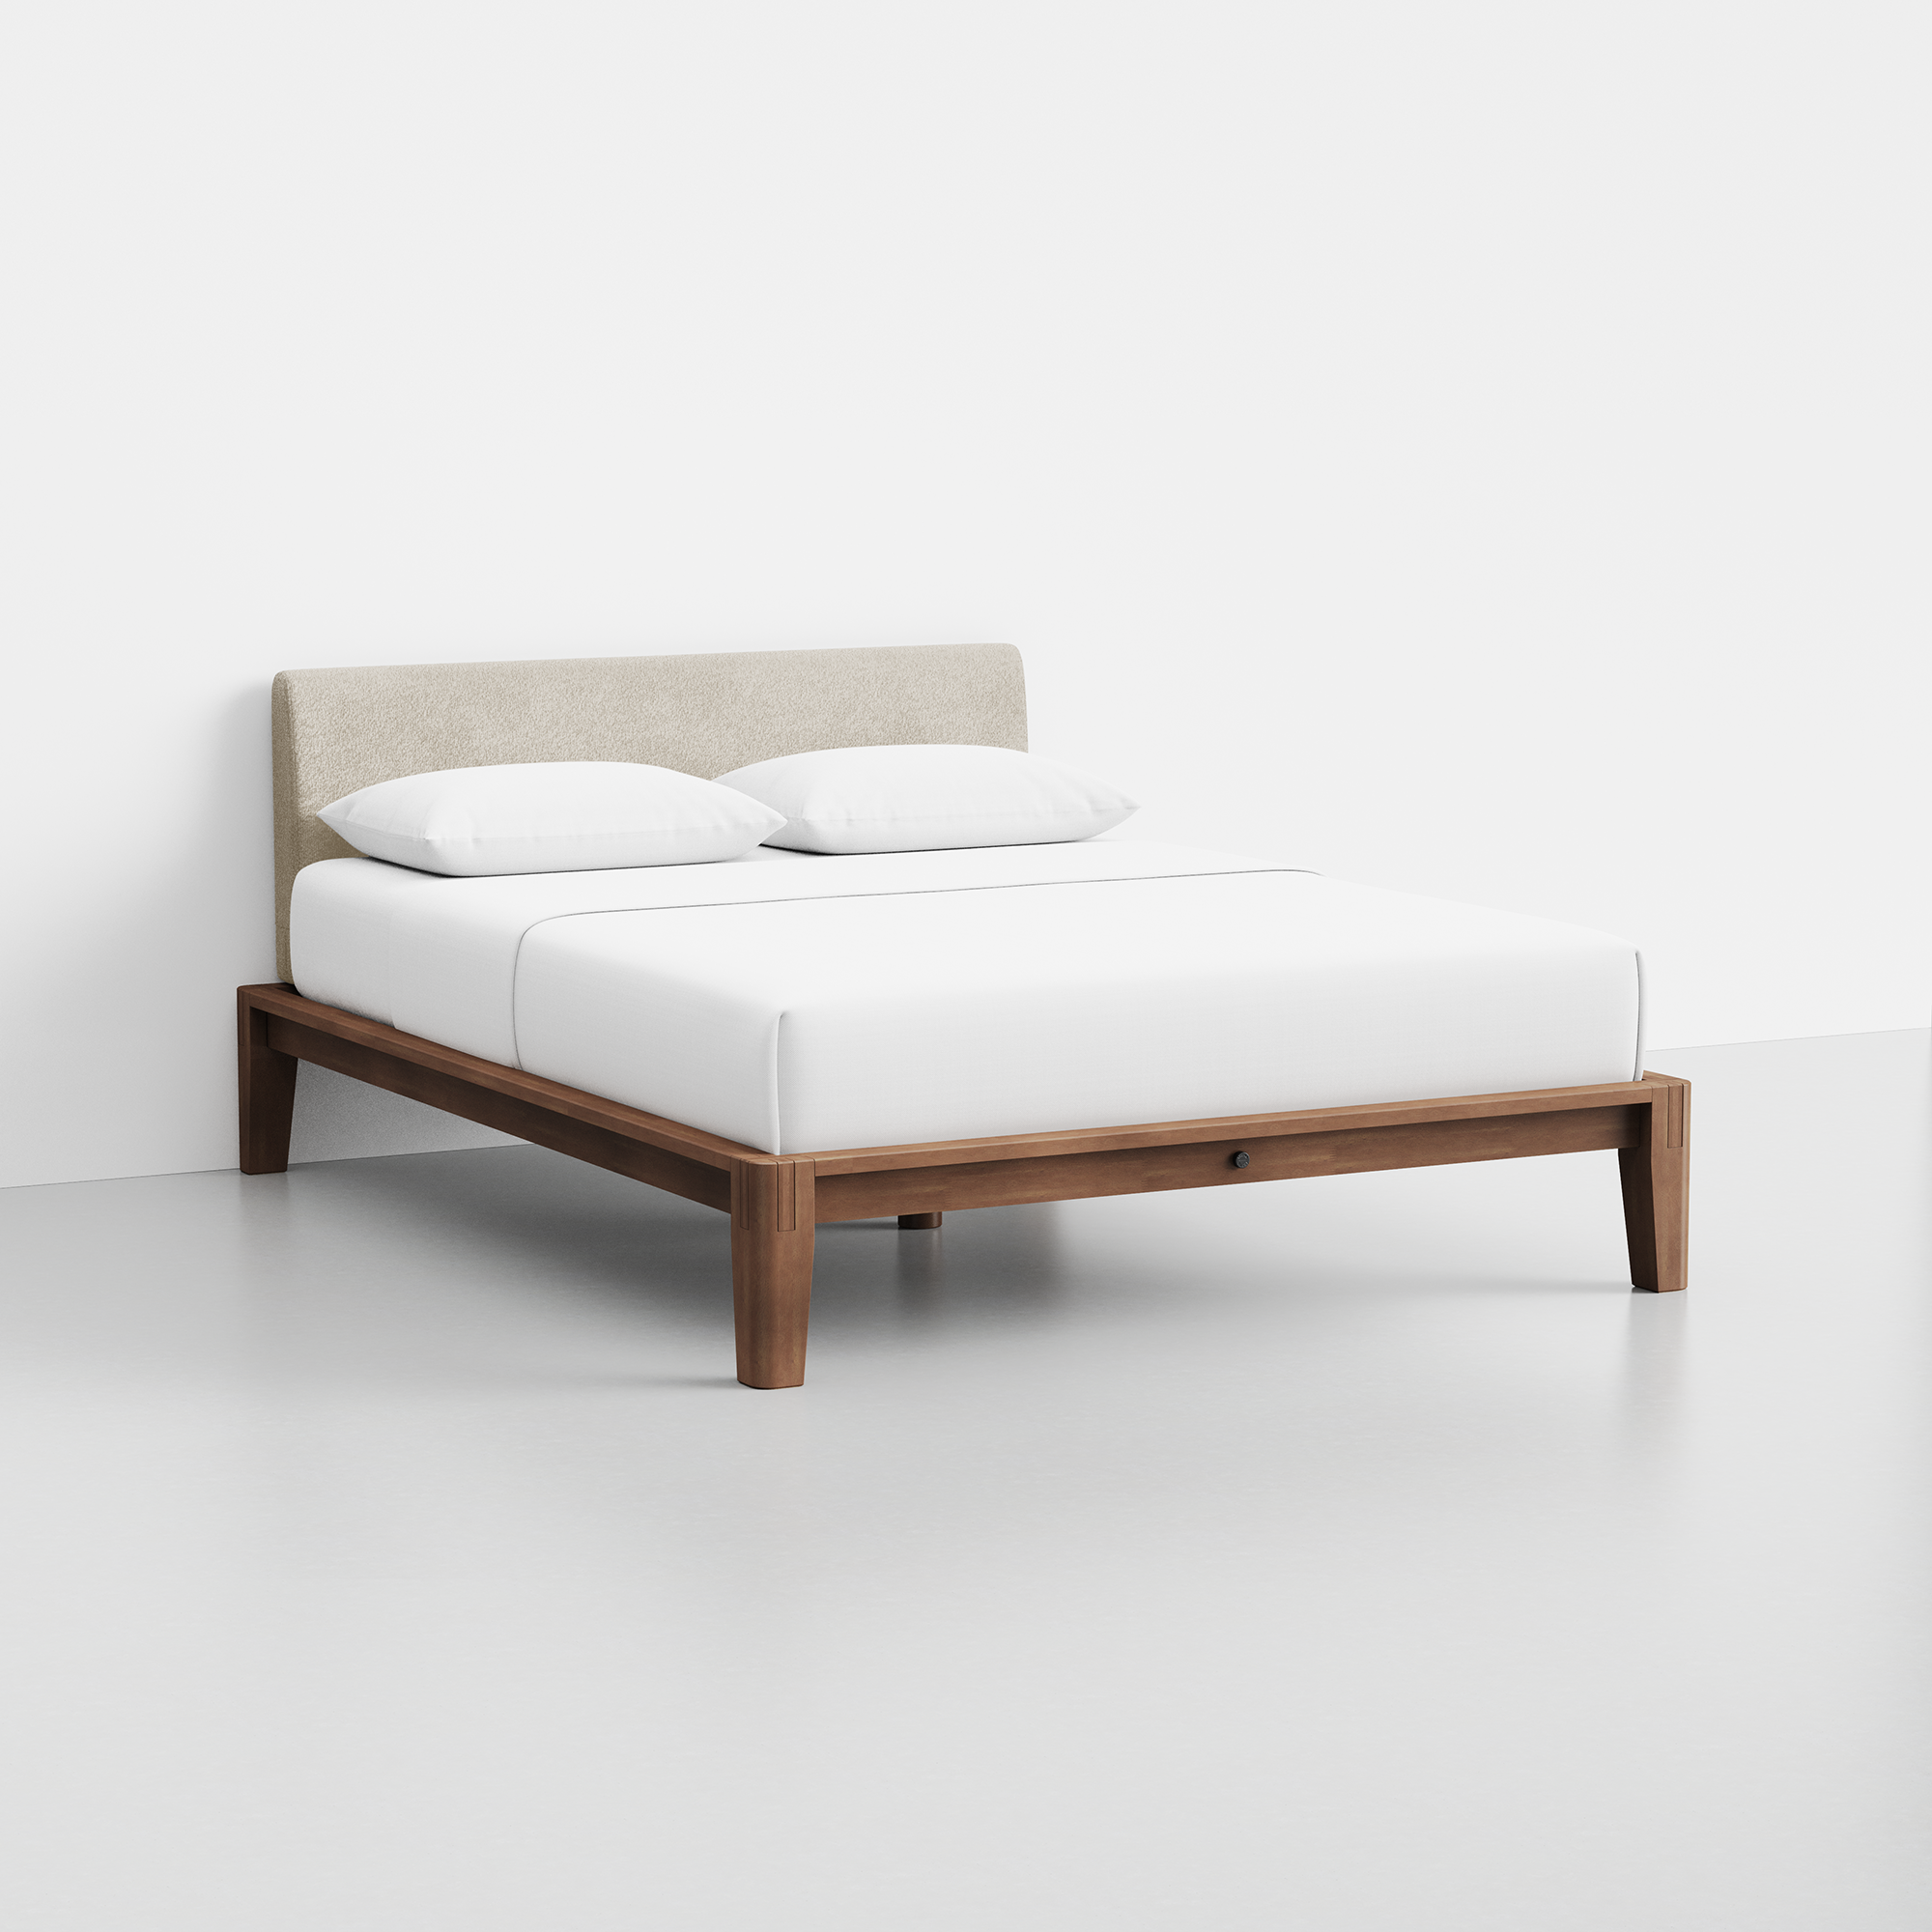 The Bed (Walnut / Cafe) - Render - Angled